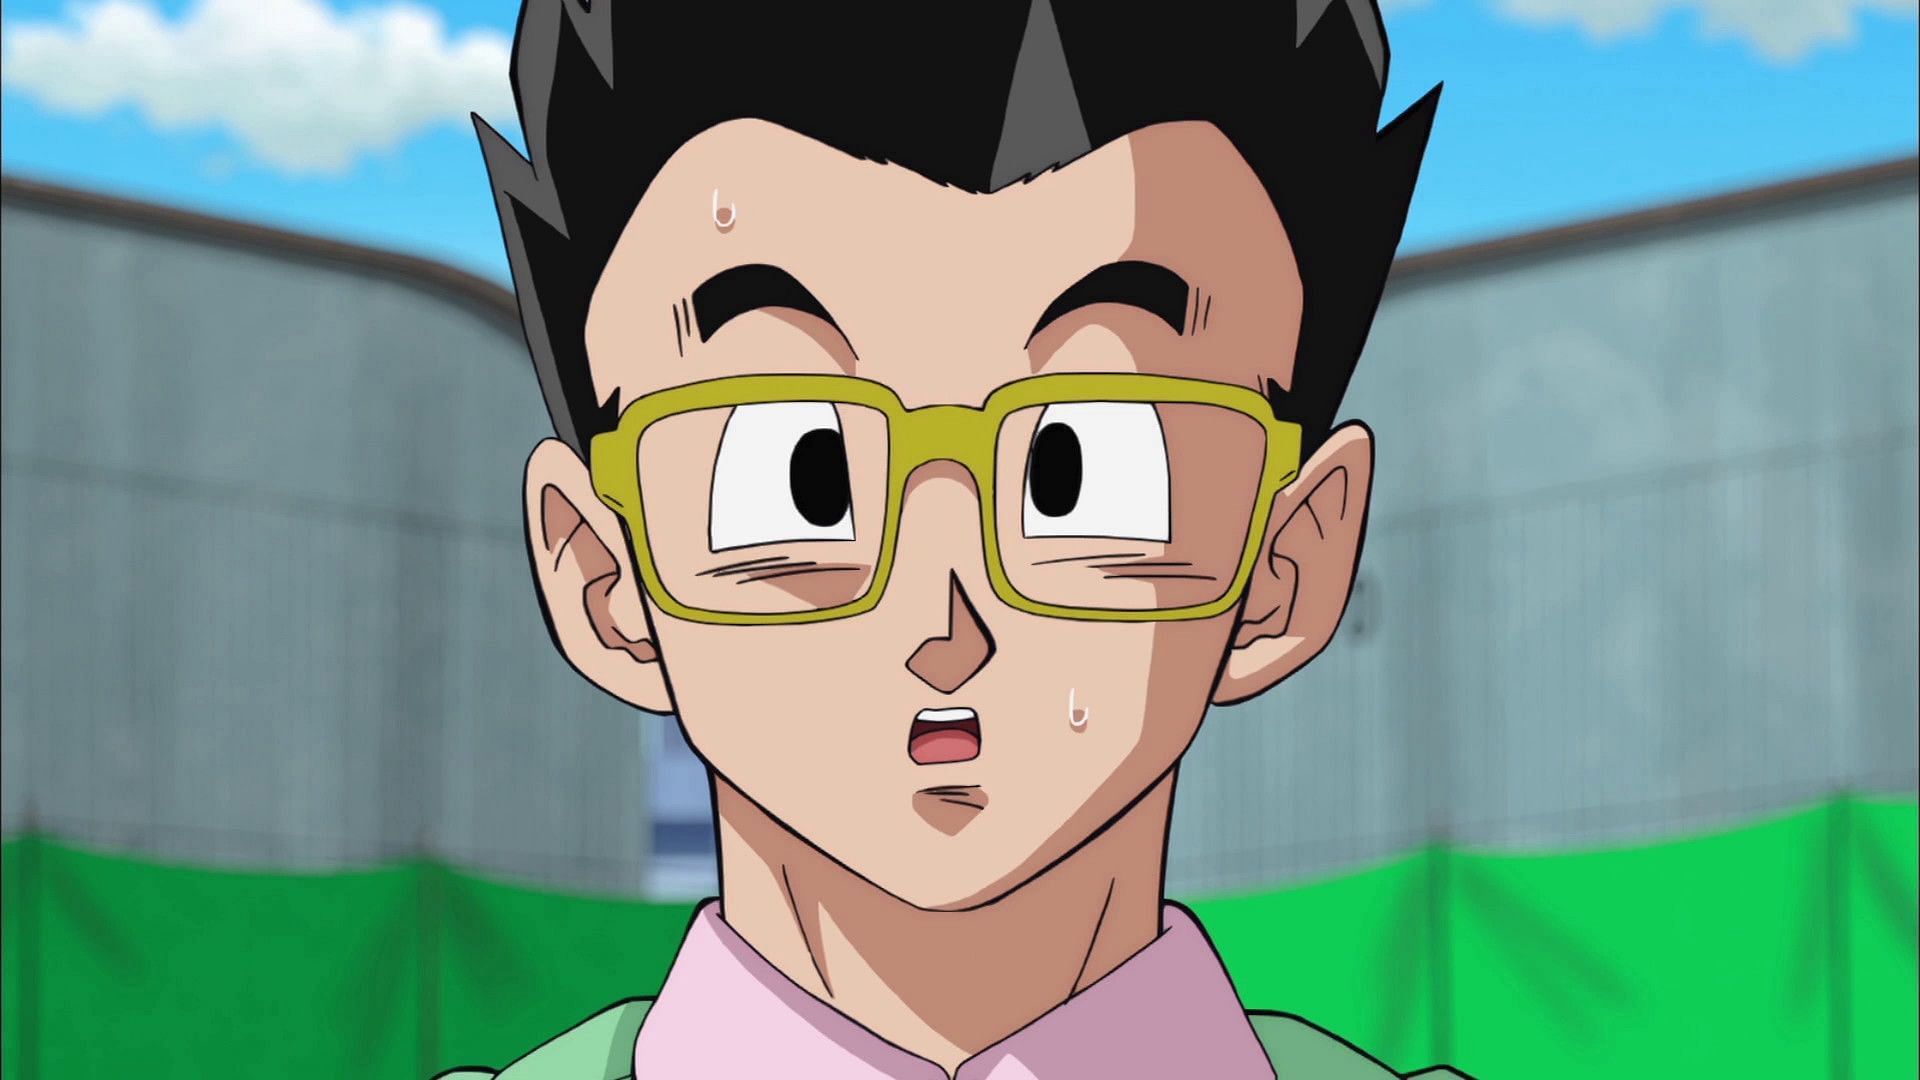 Gohan as he appears in the anime (Image via Funimation)